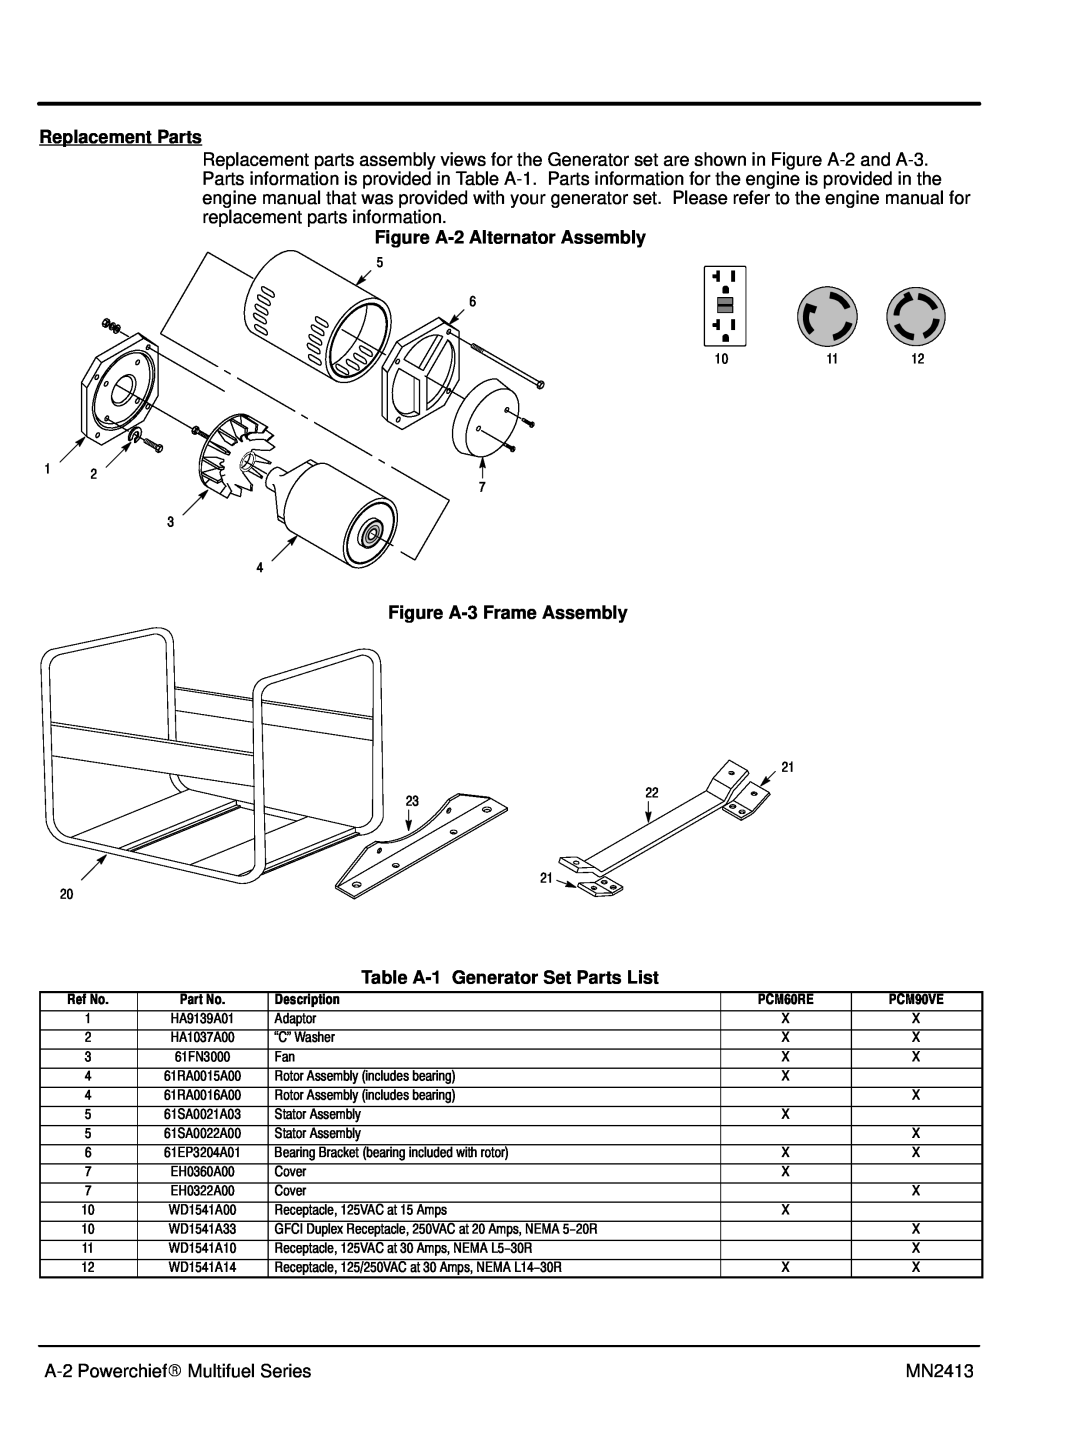 Baldor Series PC Mutlifuel manual Replacement Parts, Figure A-2 Alternator Assembly, Figure A-3 Frame Assembly 